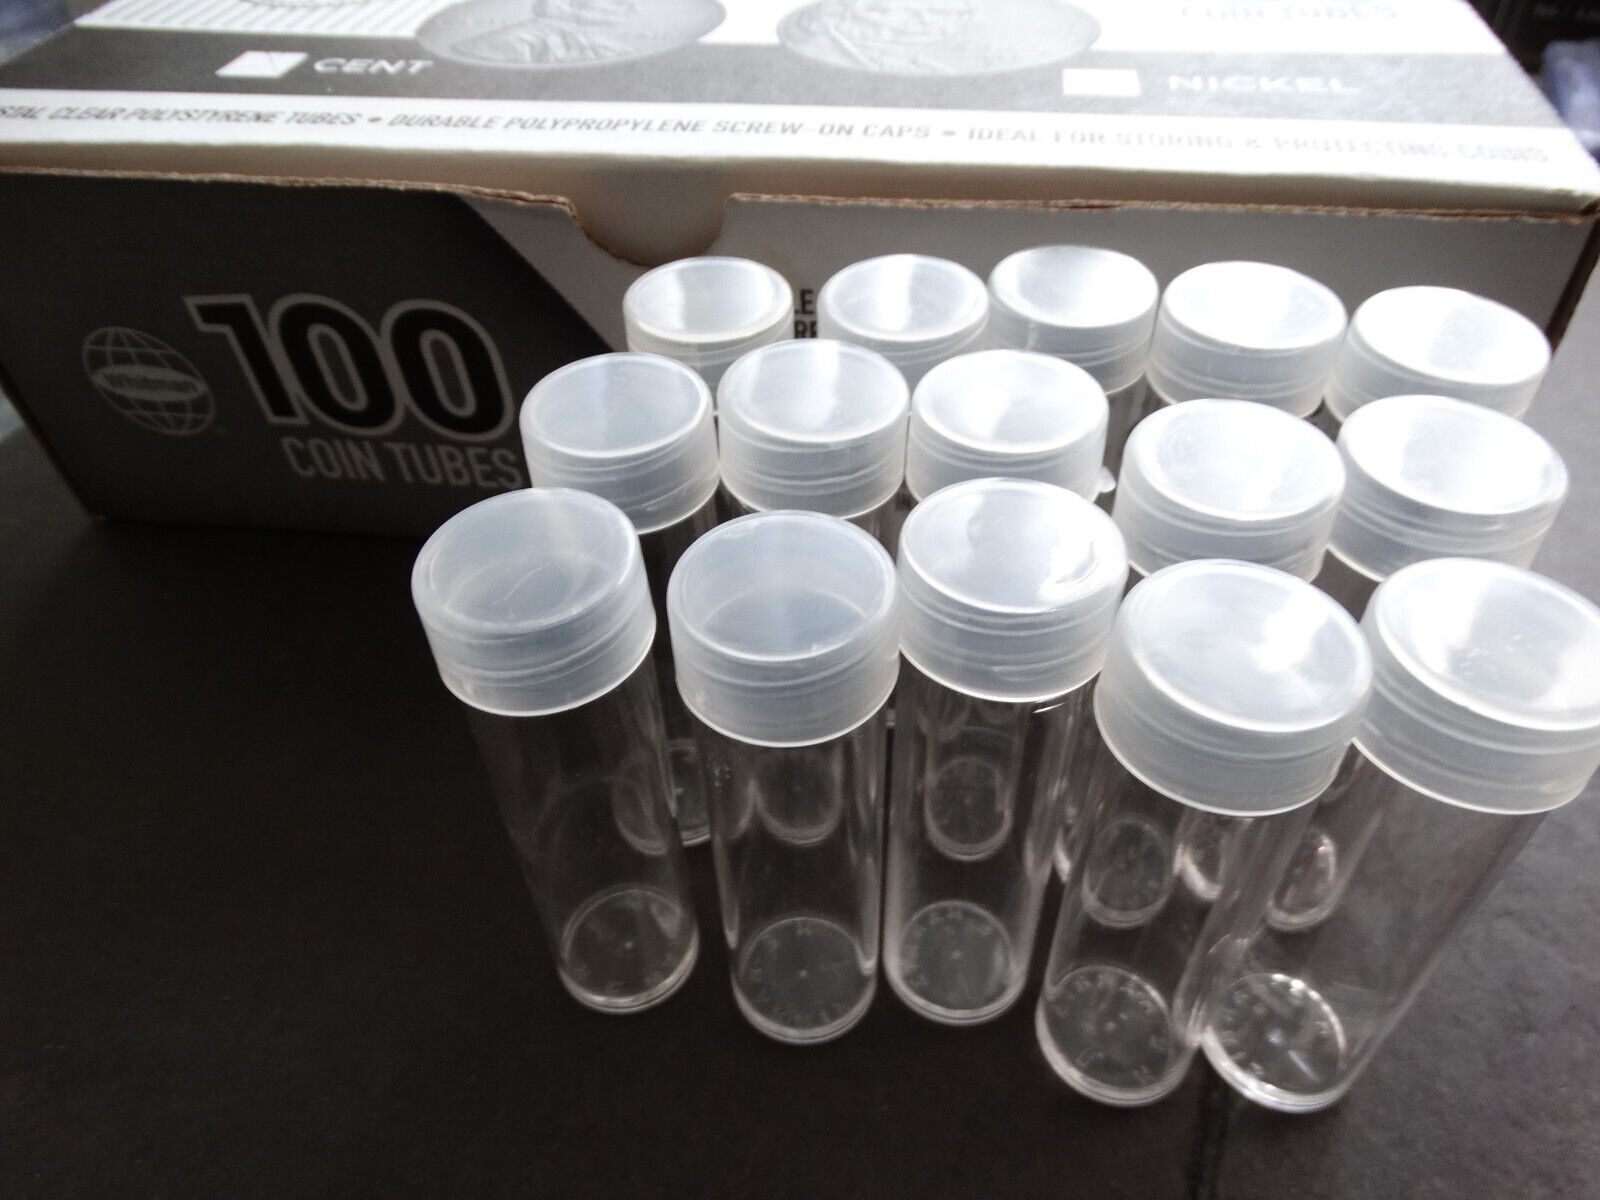 Lot of 15 Whitman Penny Round Clear Plastic Coin Storage Tubes w/ Screw On Caps - $14.49